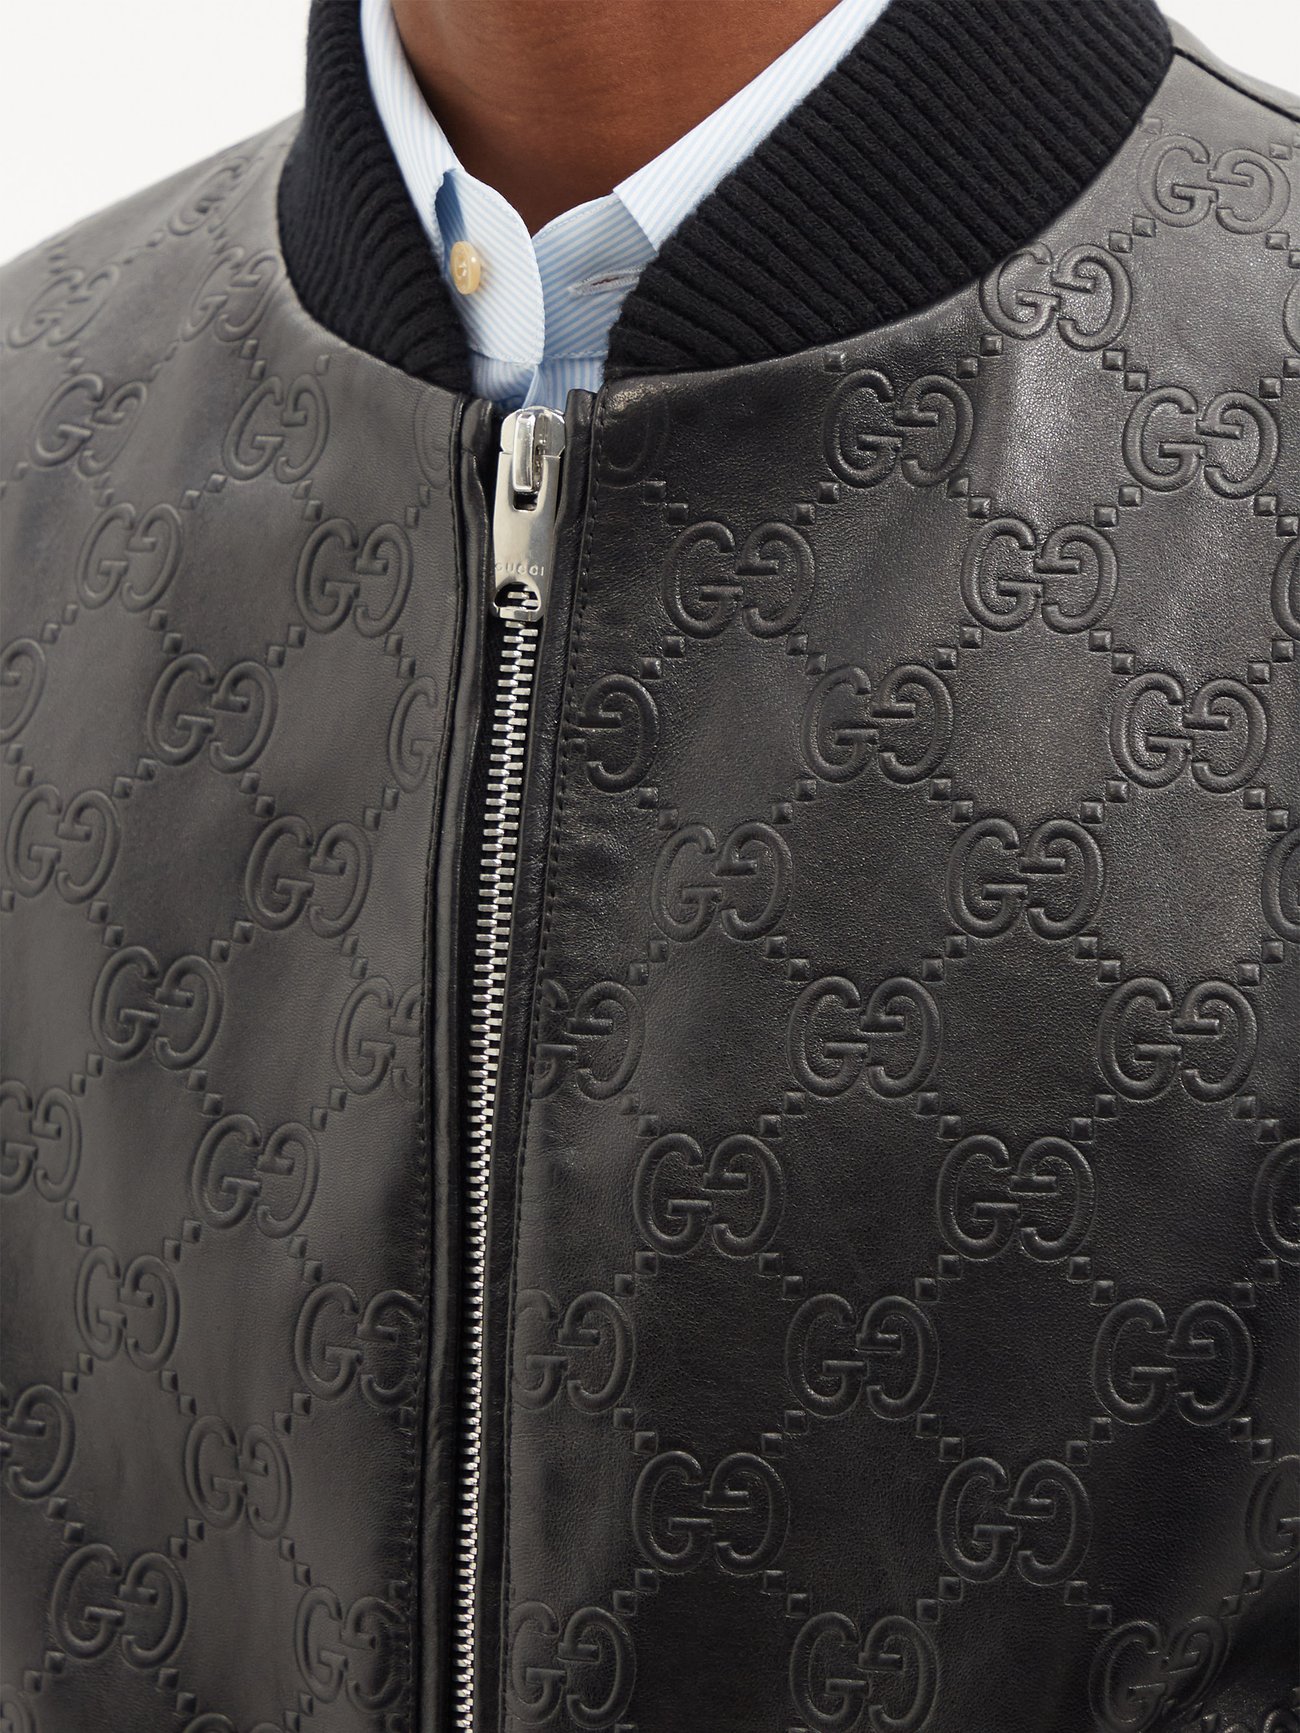 Perforated leather bomber jacket with GG